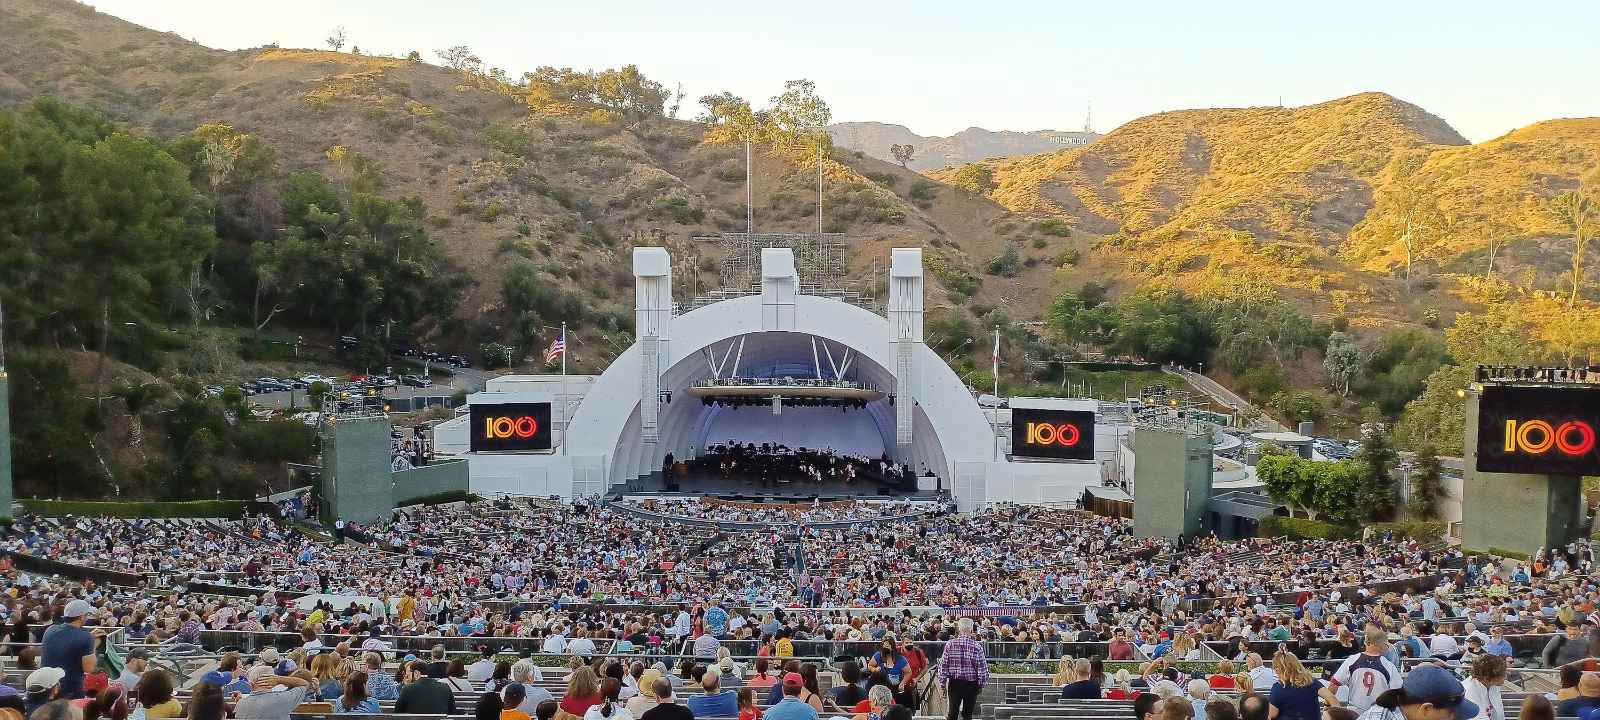 Best Things to Do in Los Angeles Hollywood Bowl